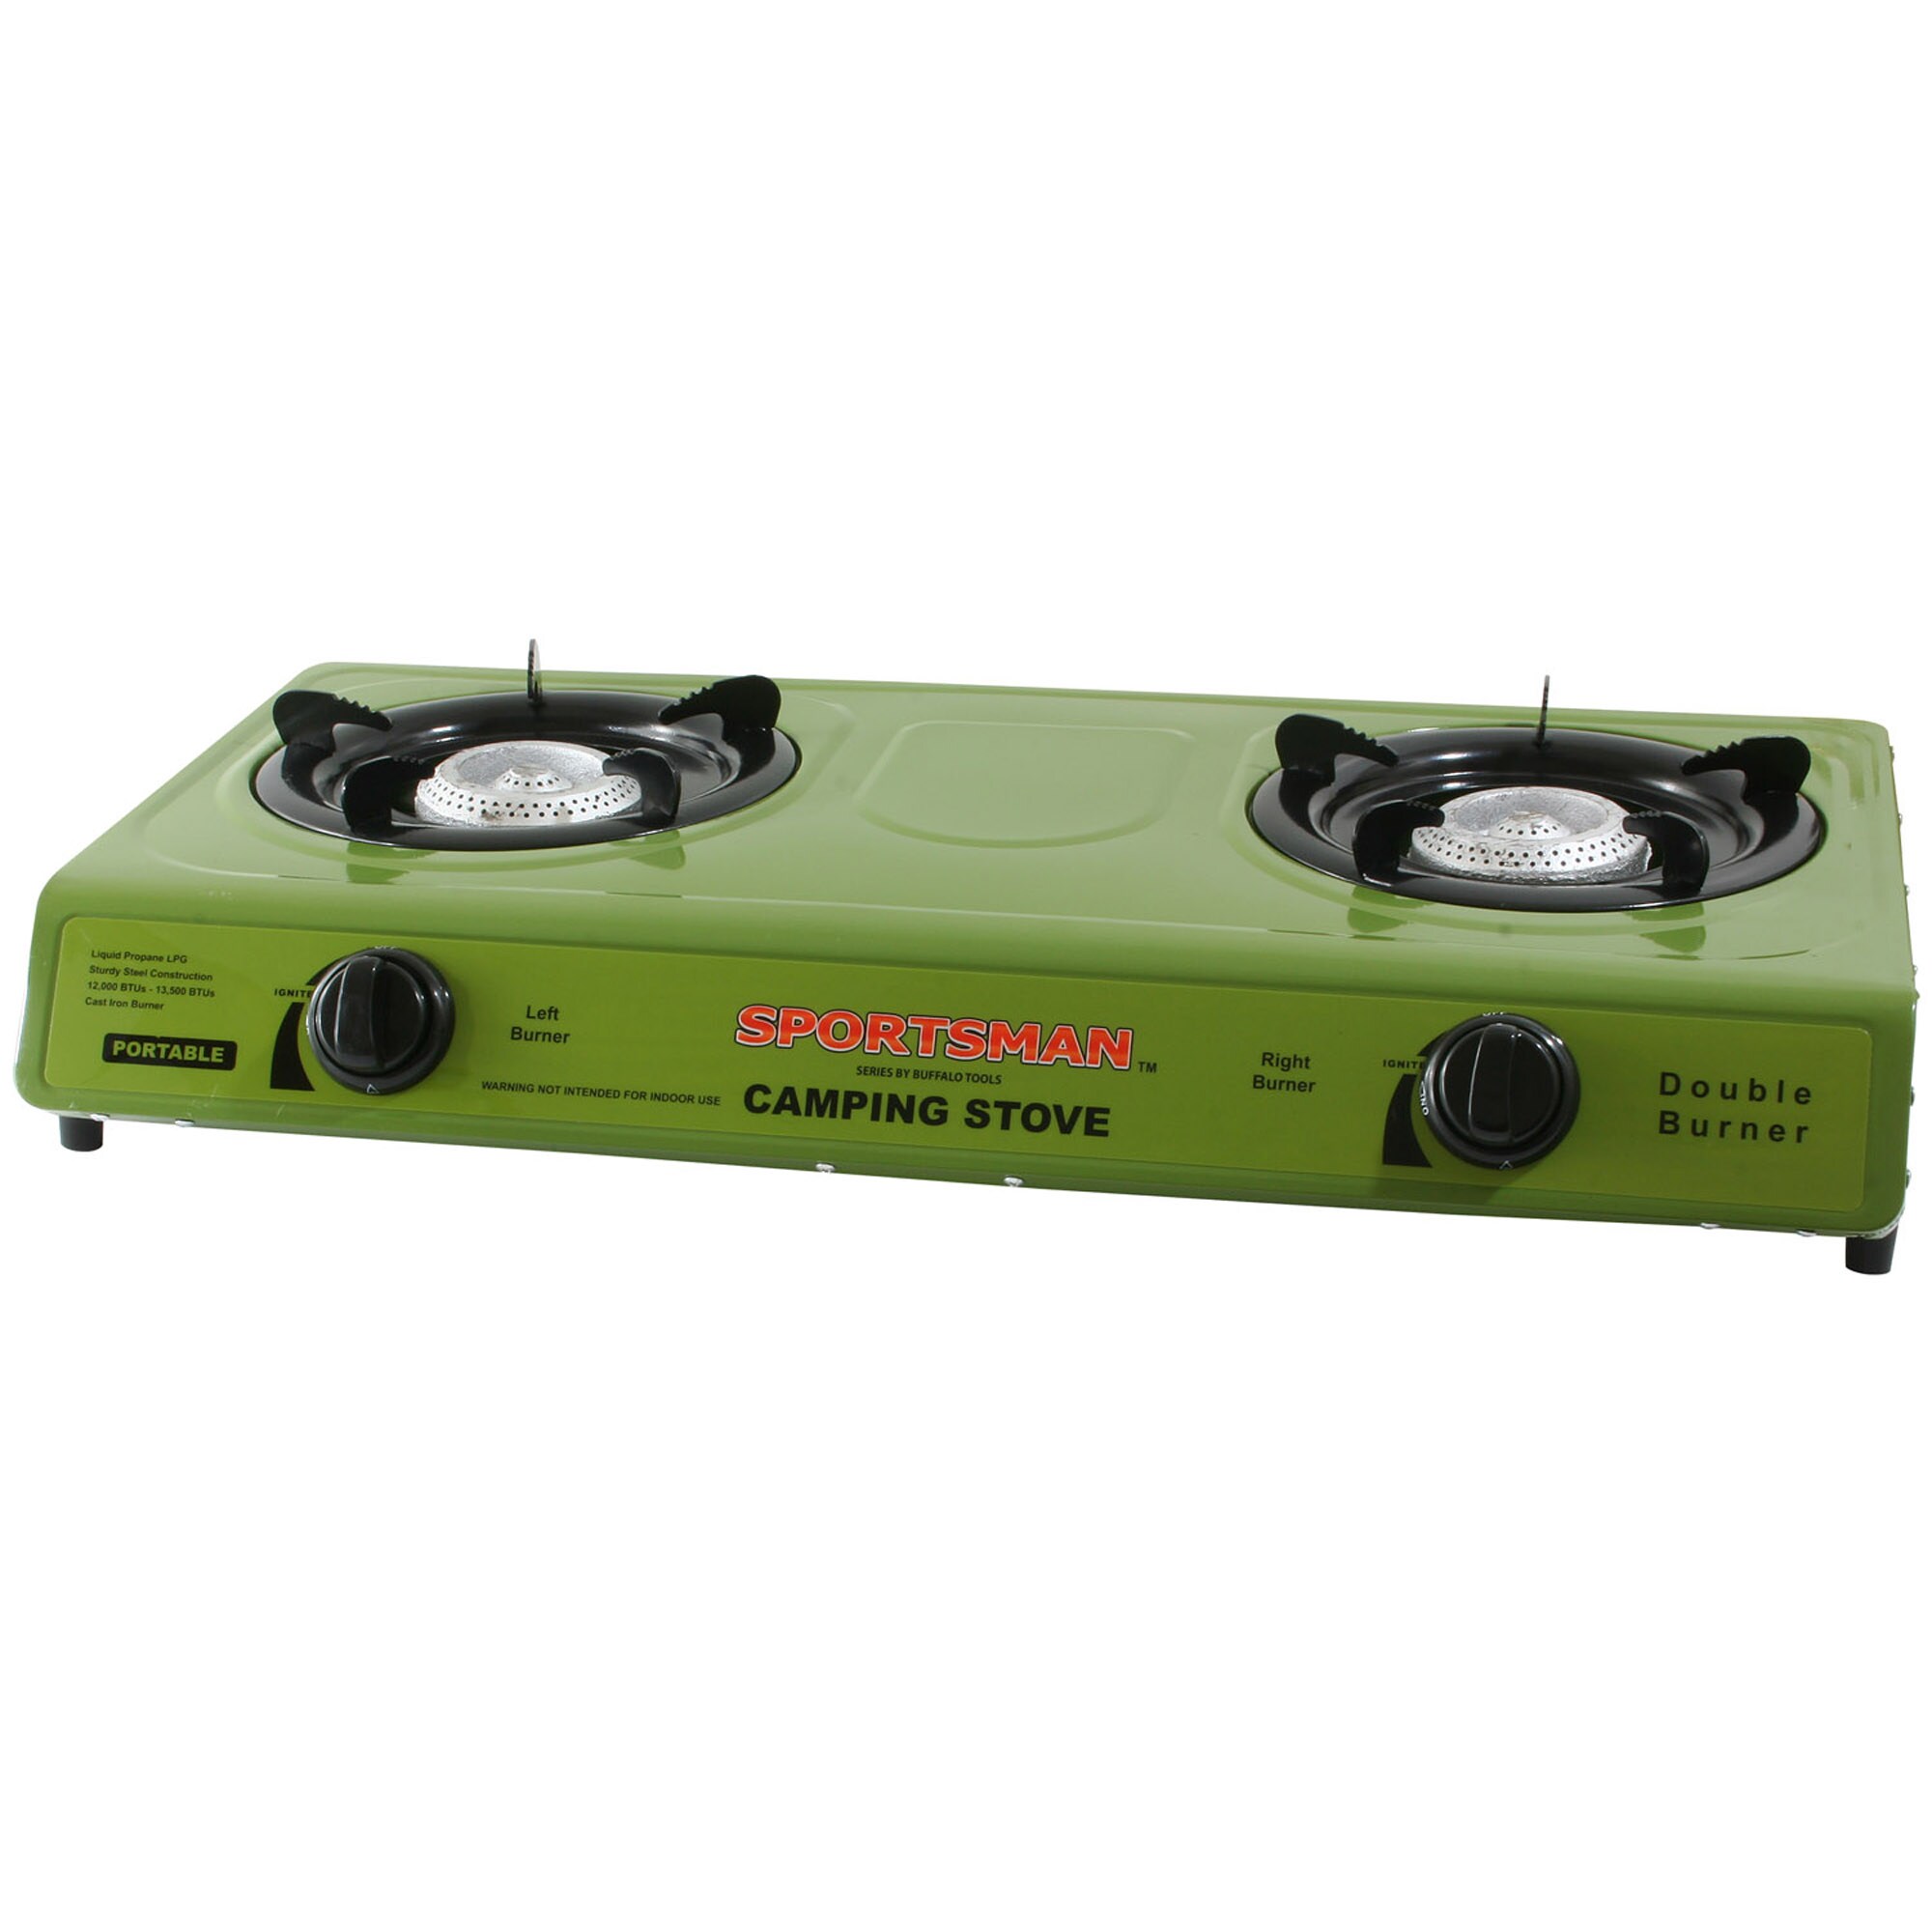 Buffalo Tools Dual burner Gas Stove (GreenGreat for cooking at the campsite and while tailgating, brew coffee, fry eggs, and heat water outdoorsAuto ignite design, steel constructionAdjustable cast iron burner provides 12,000 to 13,500 BTUsHooks up to LP 